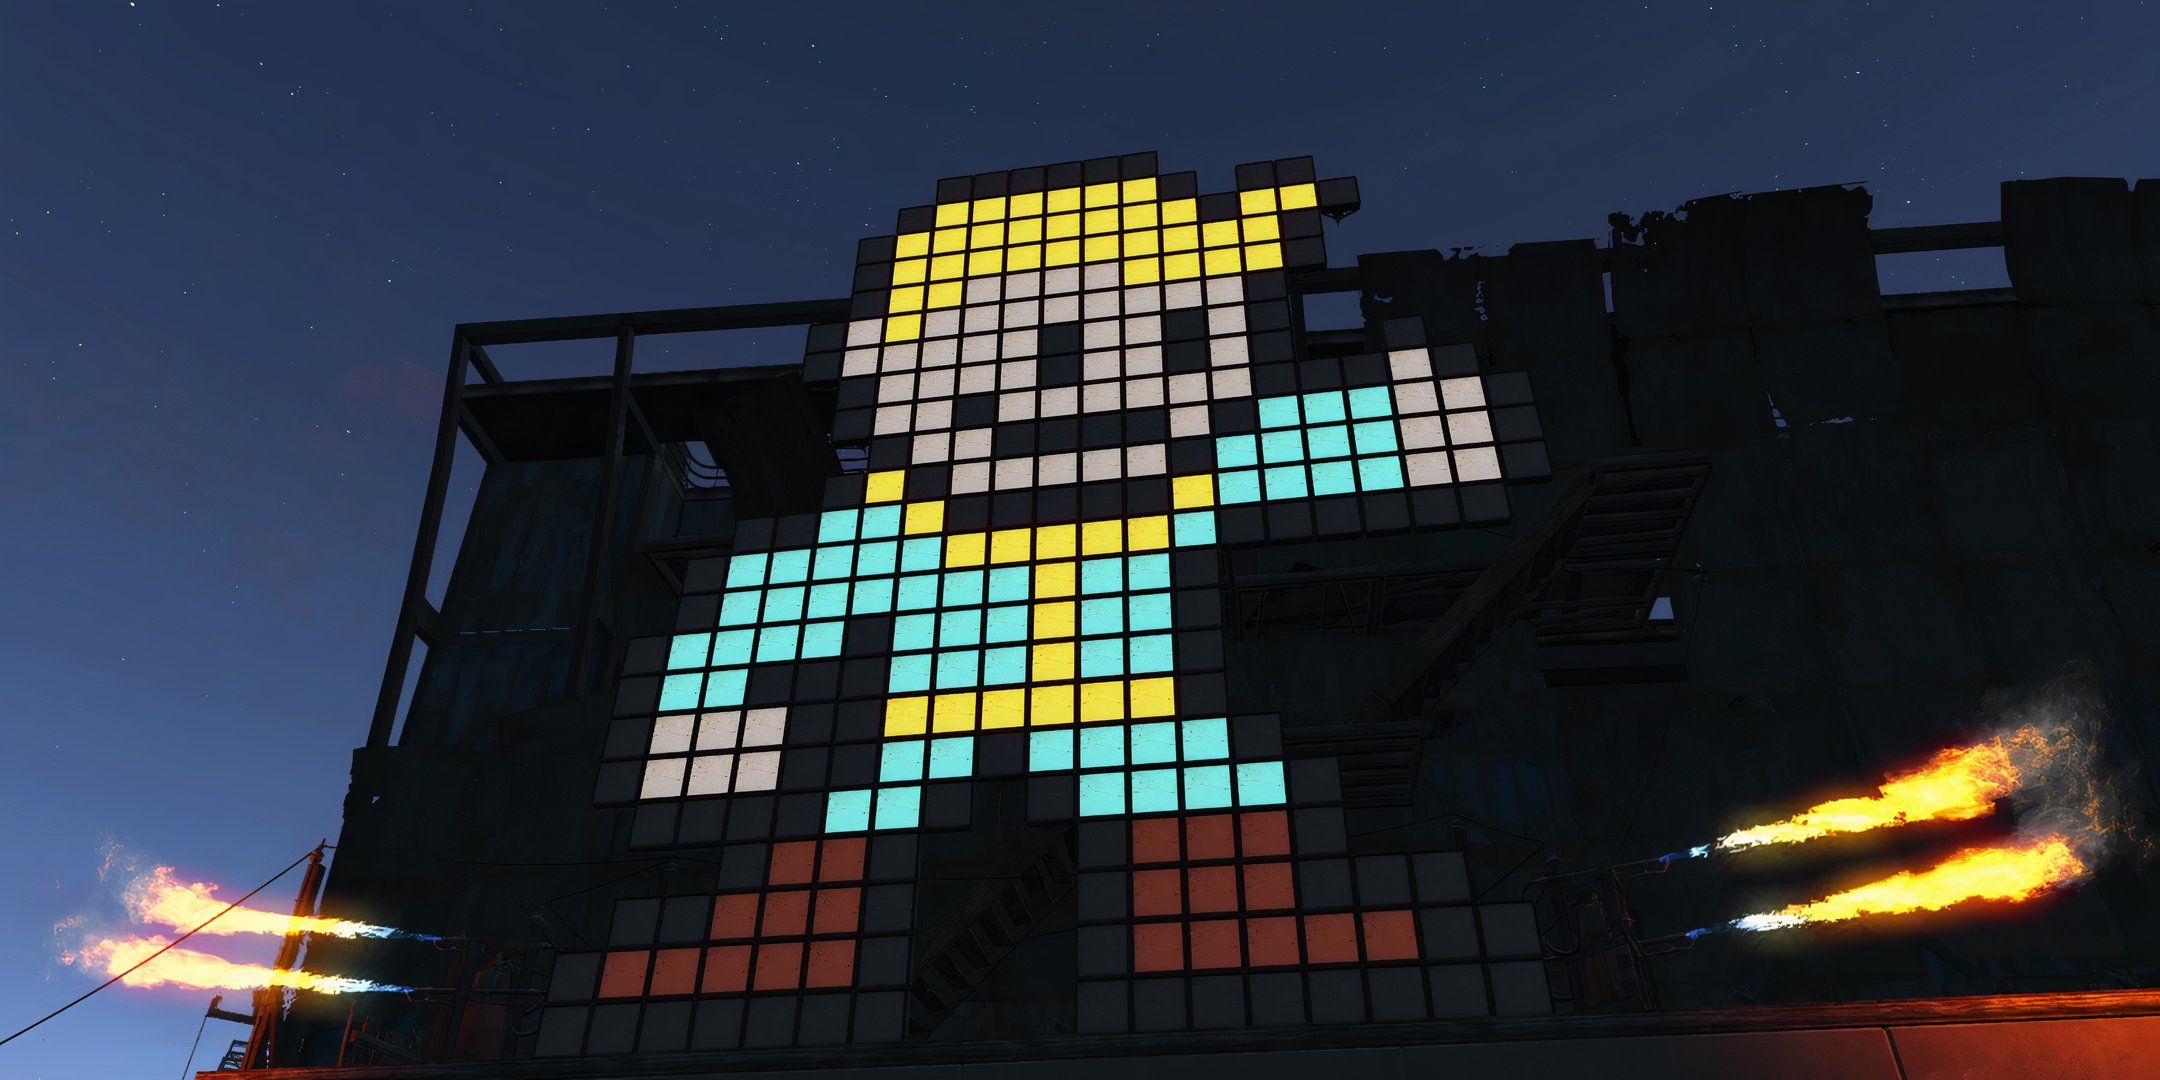 A Vault-Boy pixelated neon sign on a building in Fallout 4.